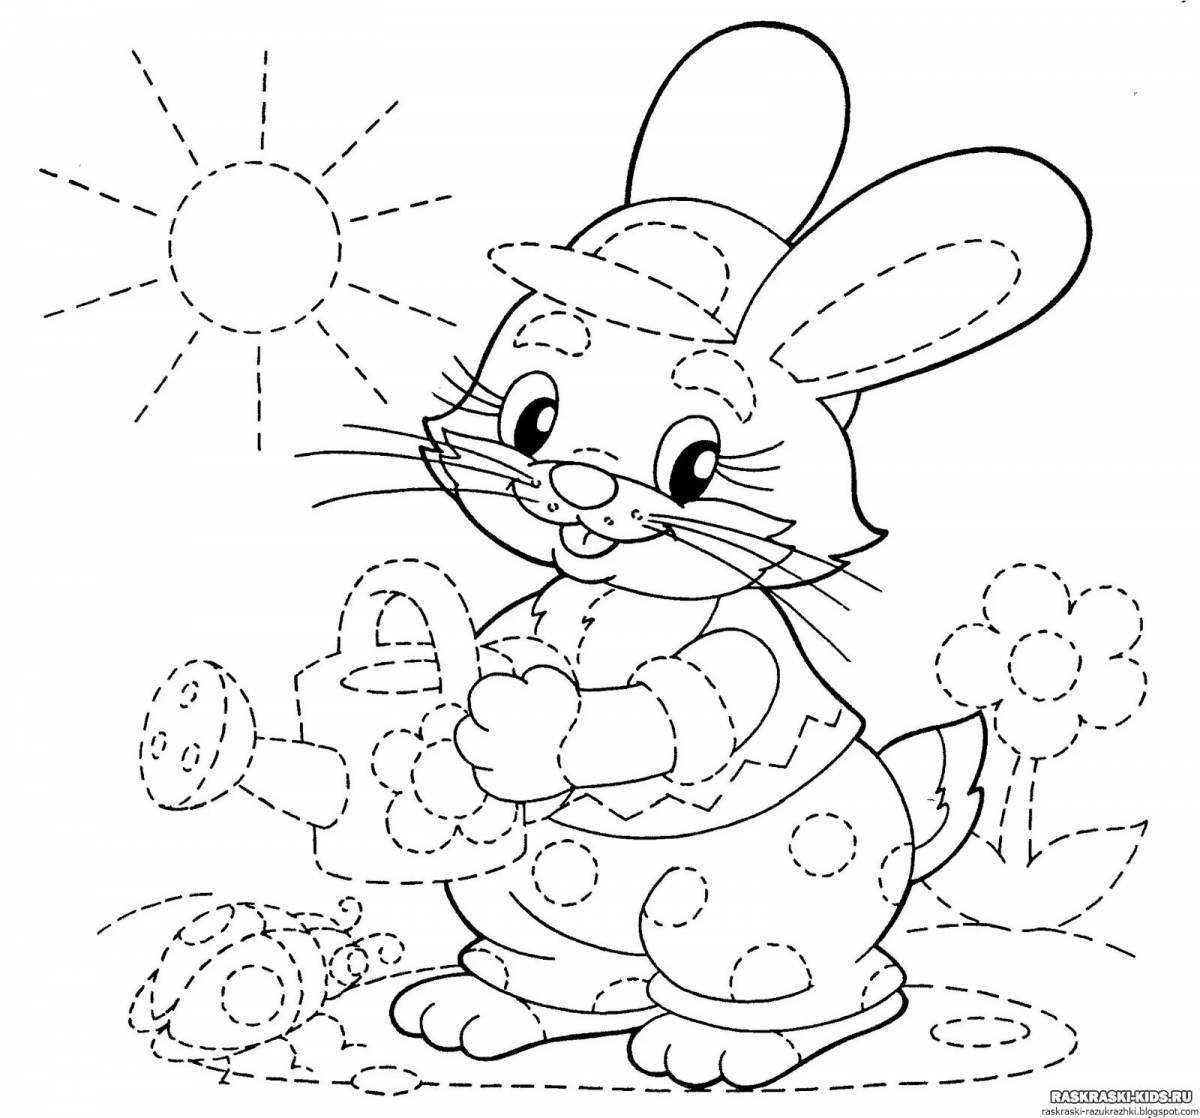 Imaginative coloring book for 5-6 year olds